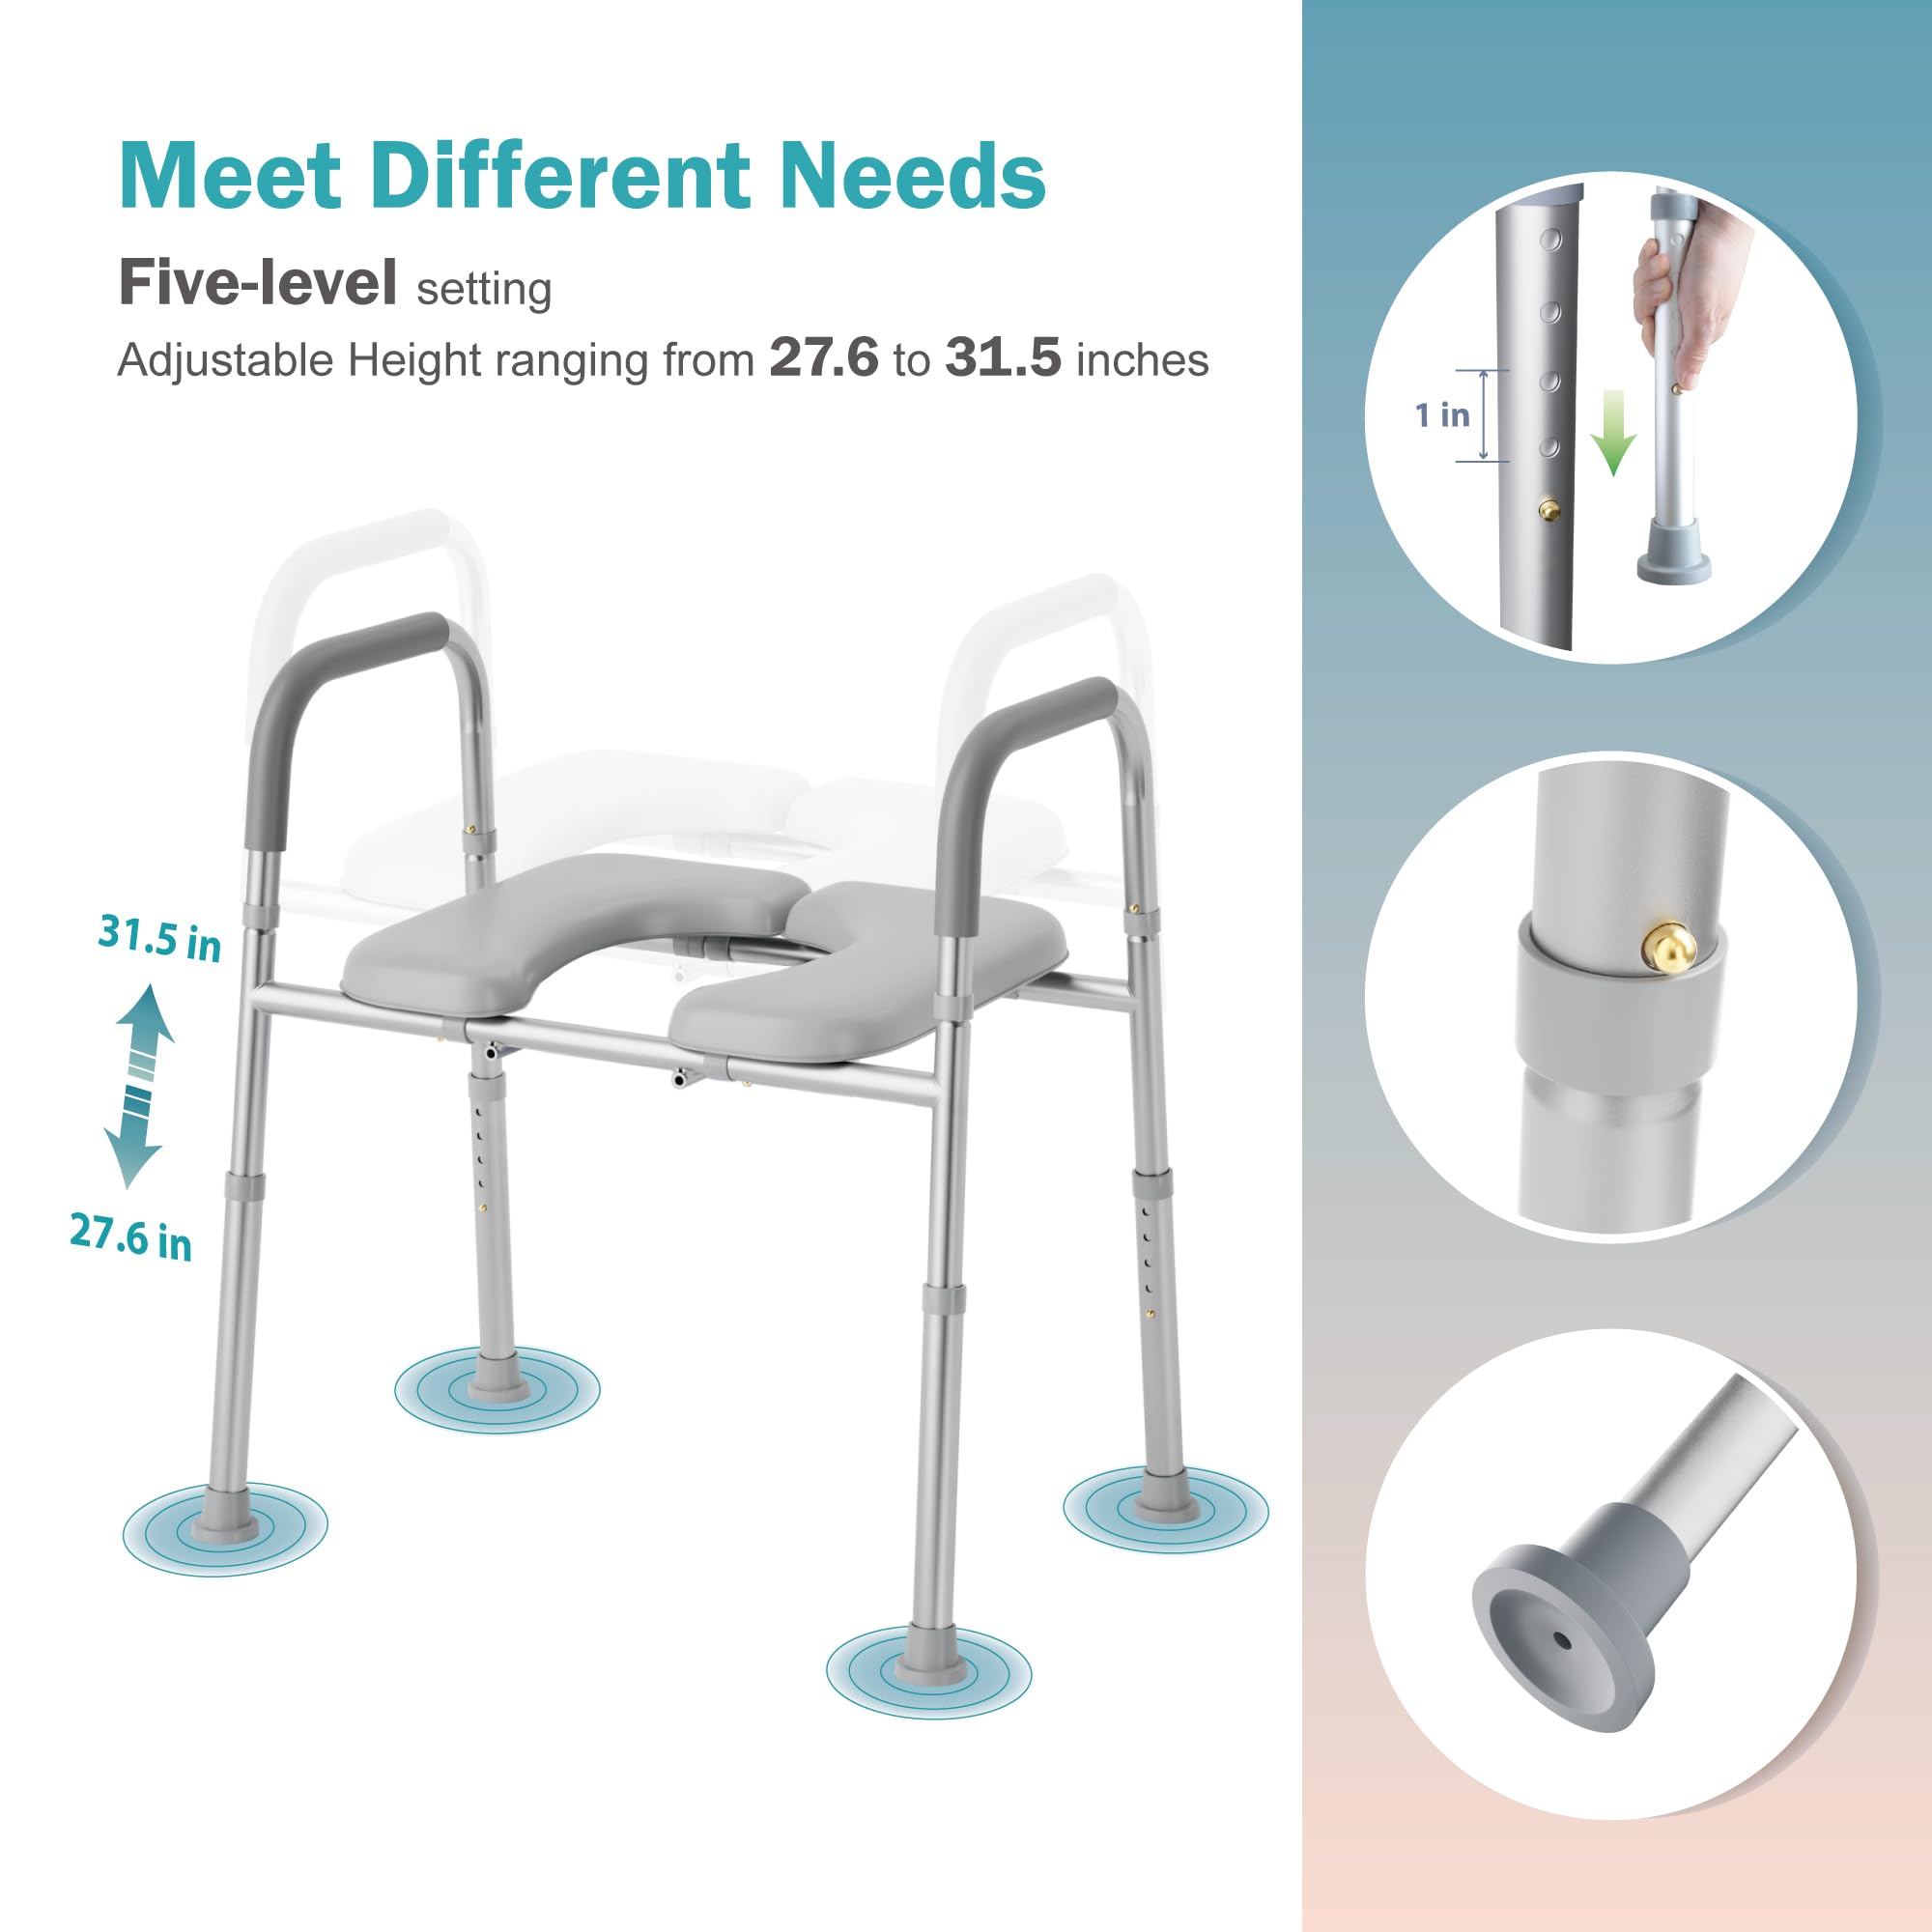 Eillion Raised Toilet Seat with Handles Elongated Toilet Seat Risers for Seniors, Handicap Toilet Seat Riser with Bars, Adjustable Height Toilet Seat Heavy Duty Toilet Chair for Elderly and Disabled